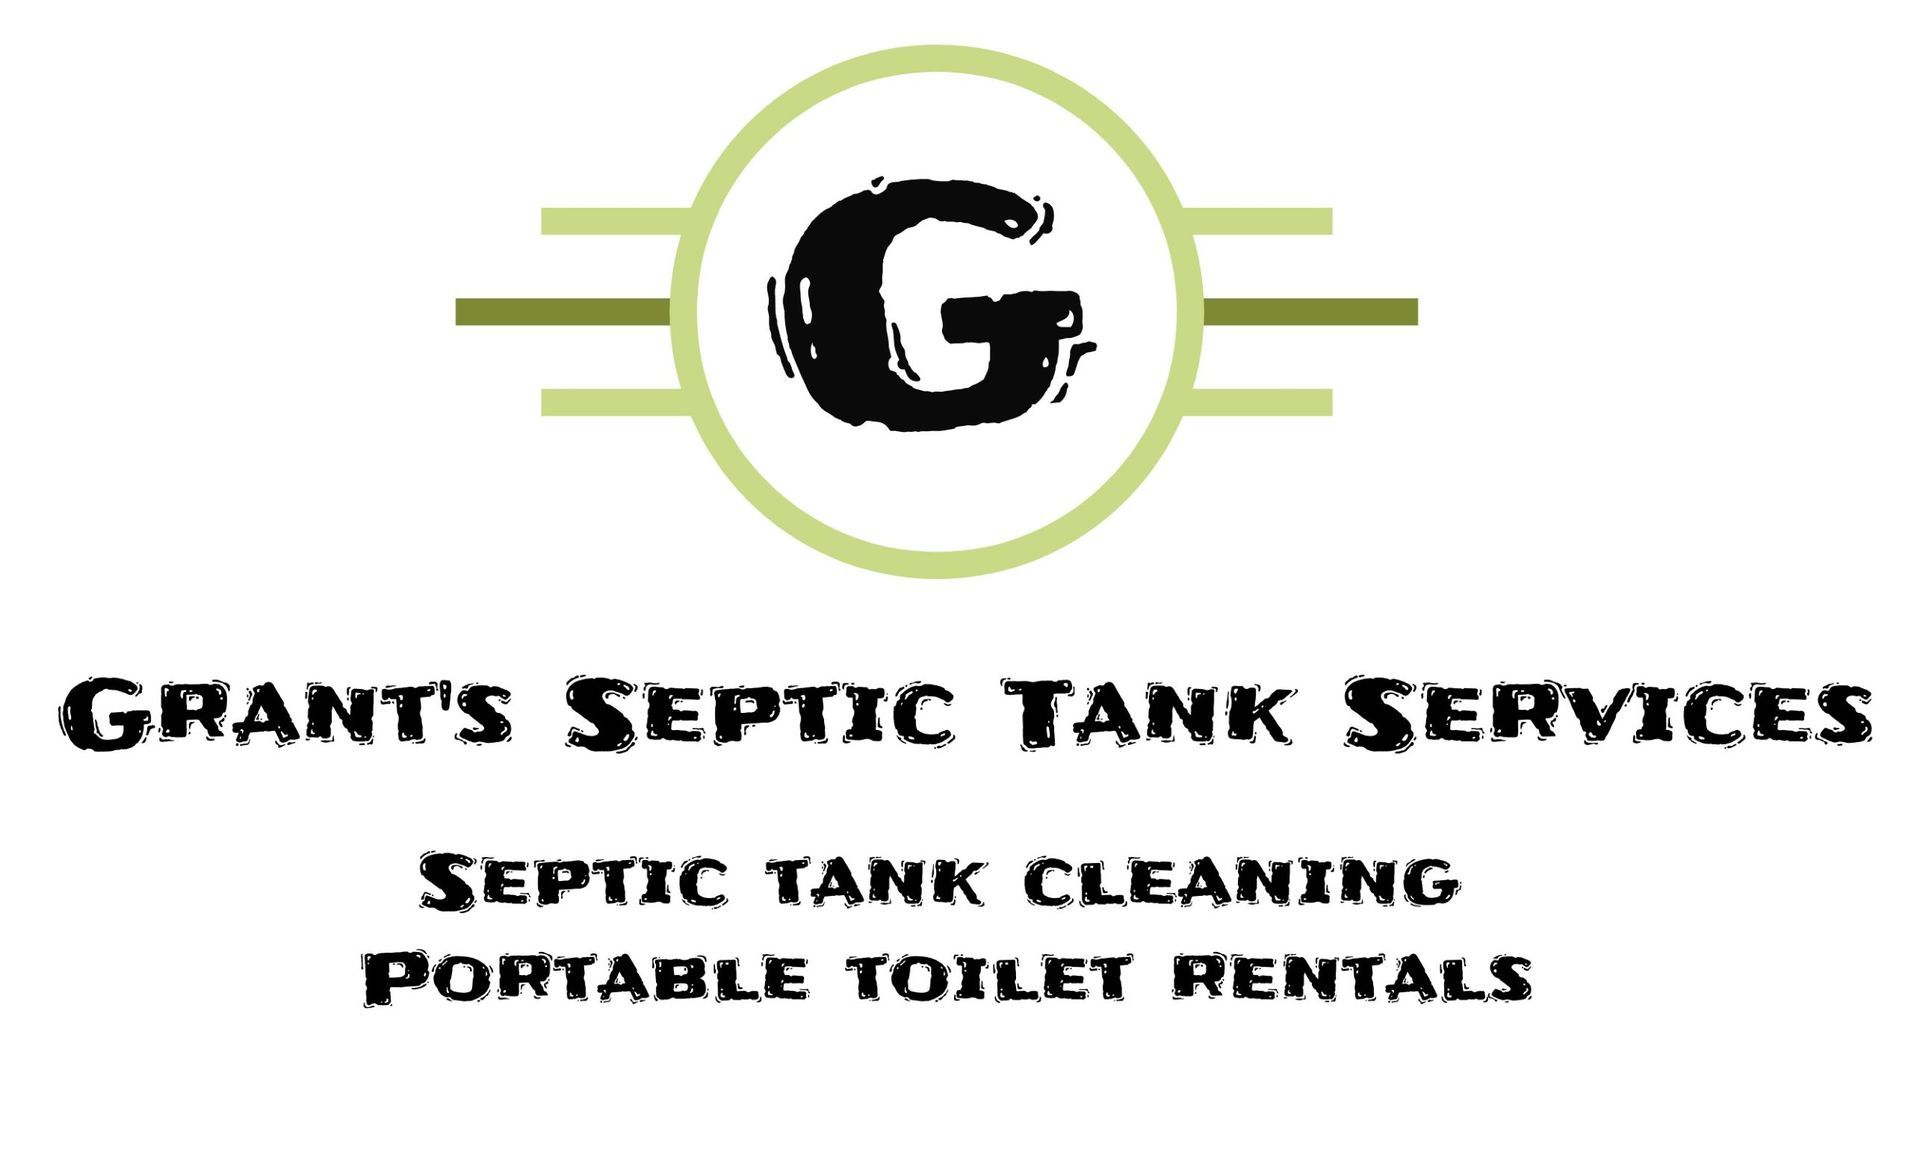 Grant's septic tank services logo